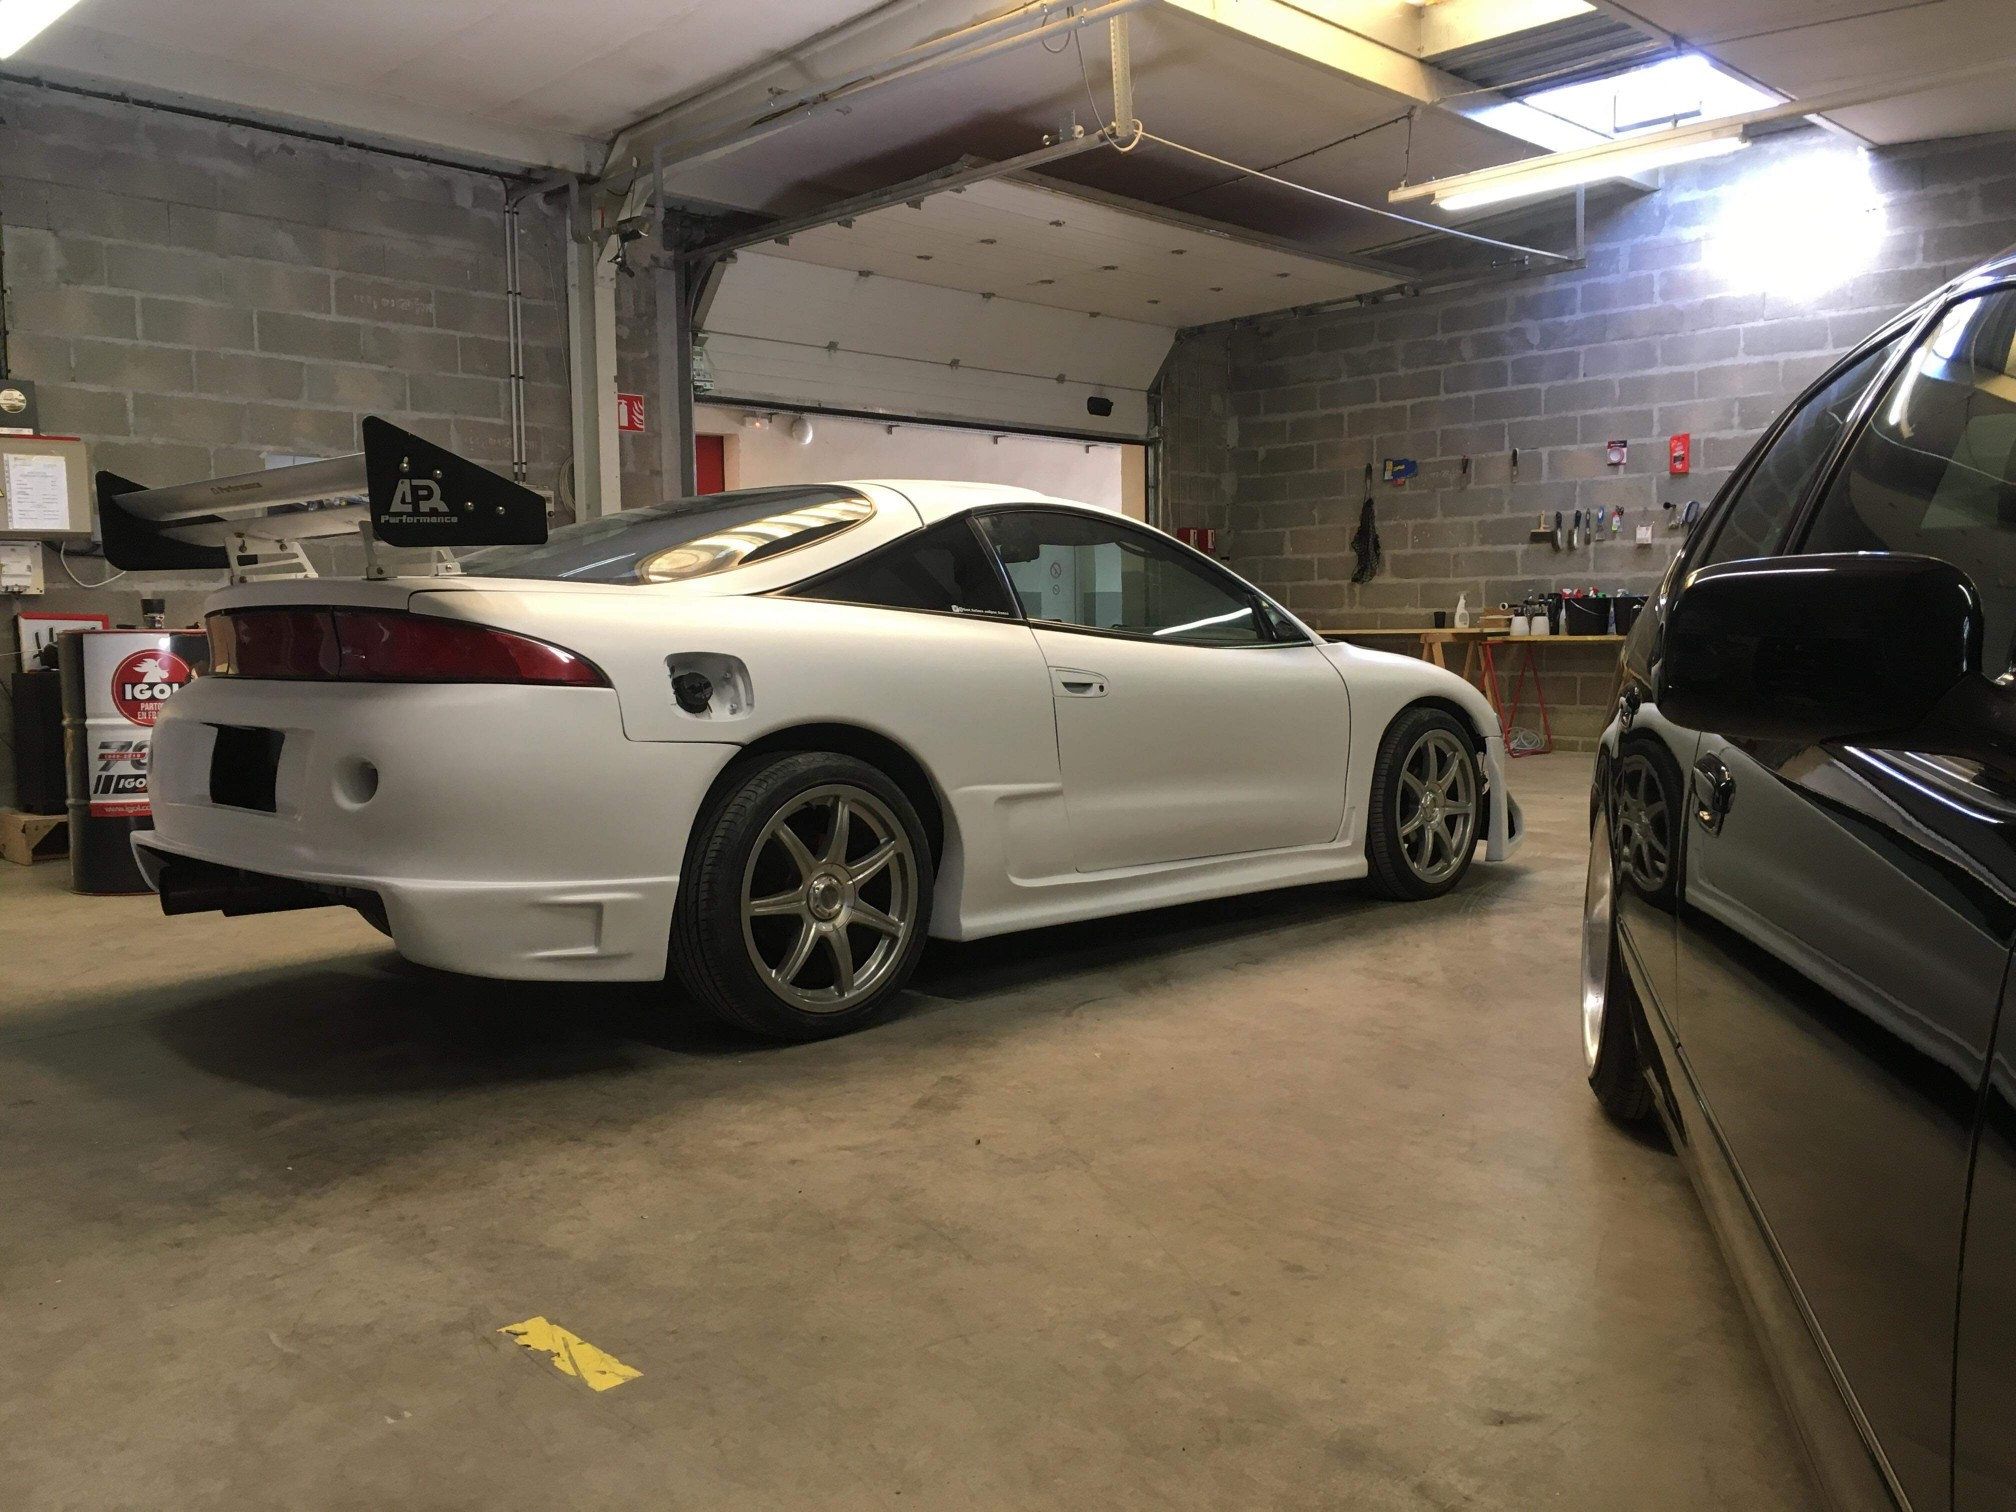 [Mitsubishi Eclipse] Fast and Furious Page 29